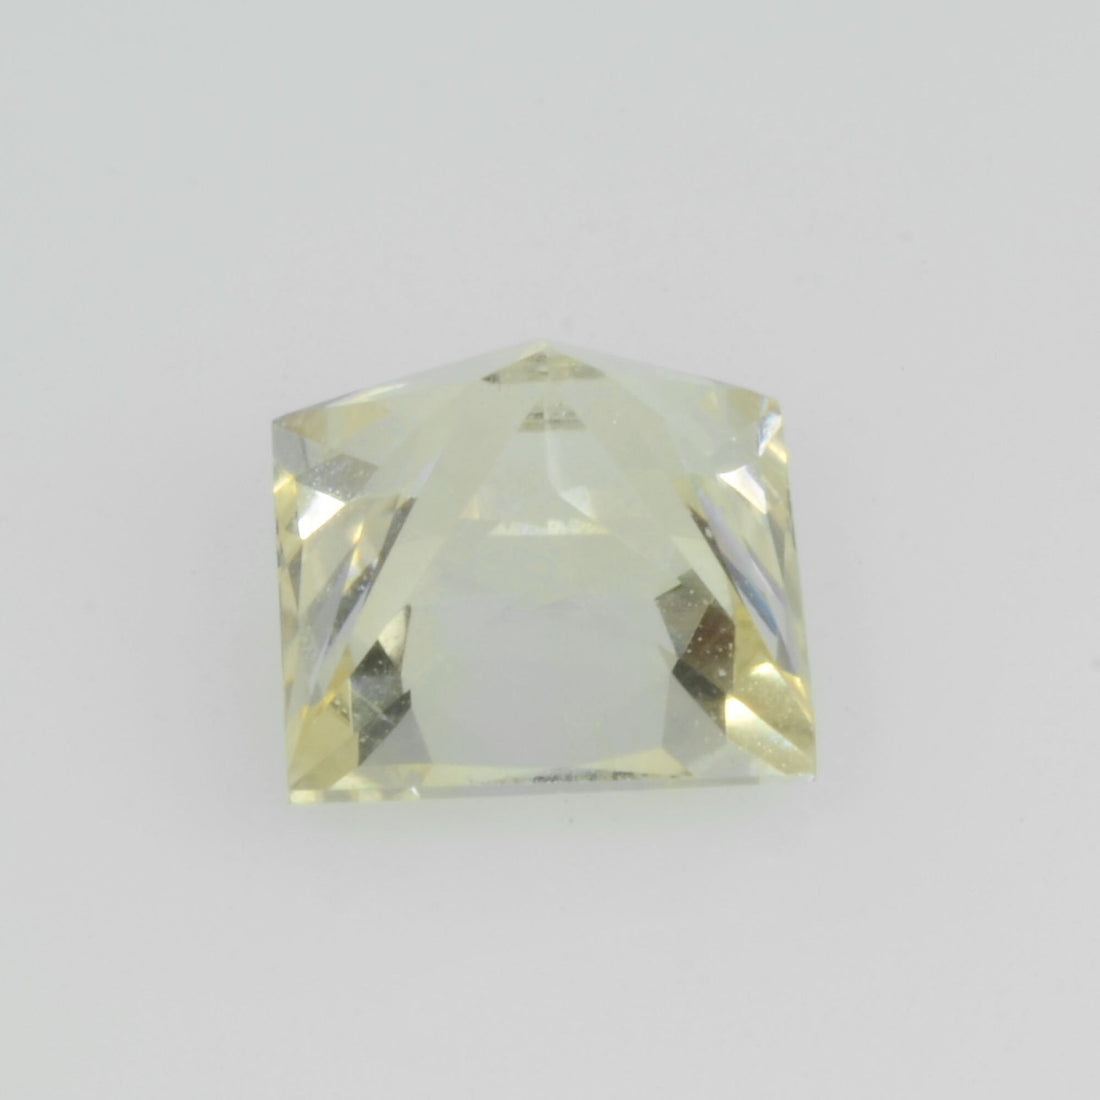 1.67 Cts Unheated Natural Yellow Sapphire Loose Gemstone Princess Cut Certified